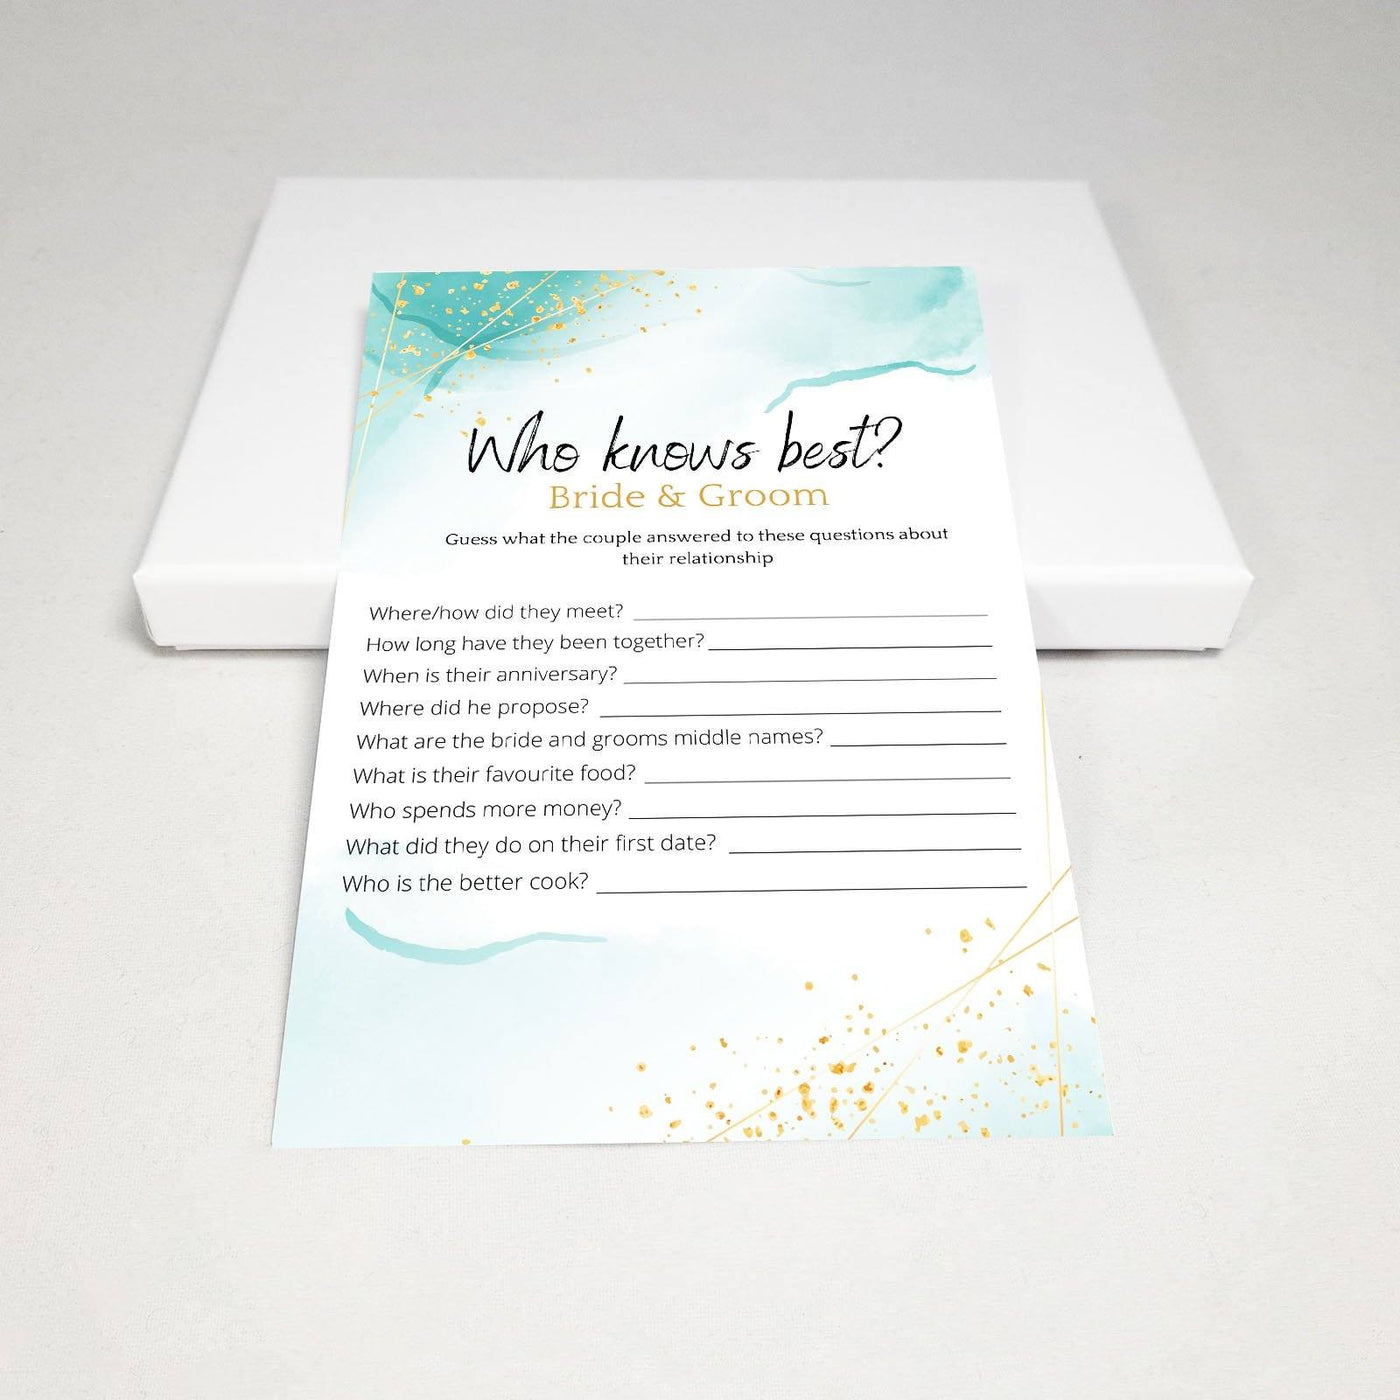 Ocean Gold - Who Knows The Bride Best? | Bridal Shower Game Party Games Your Party Games 